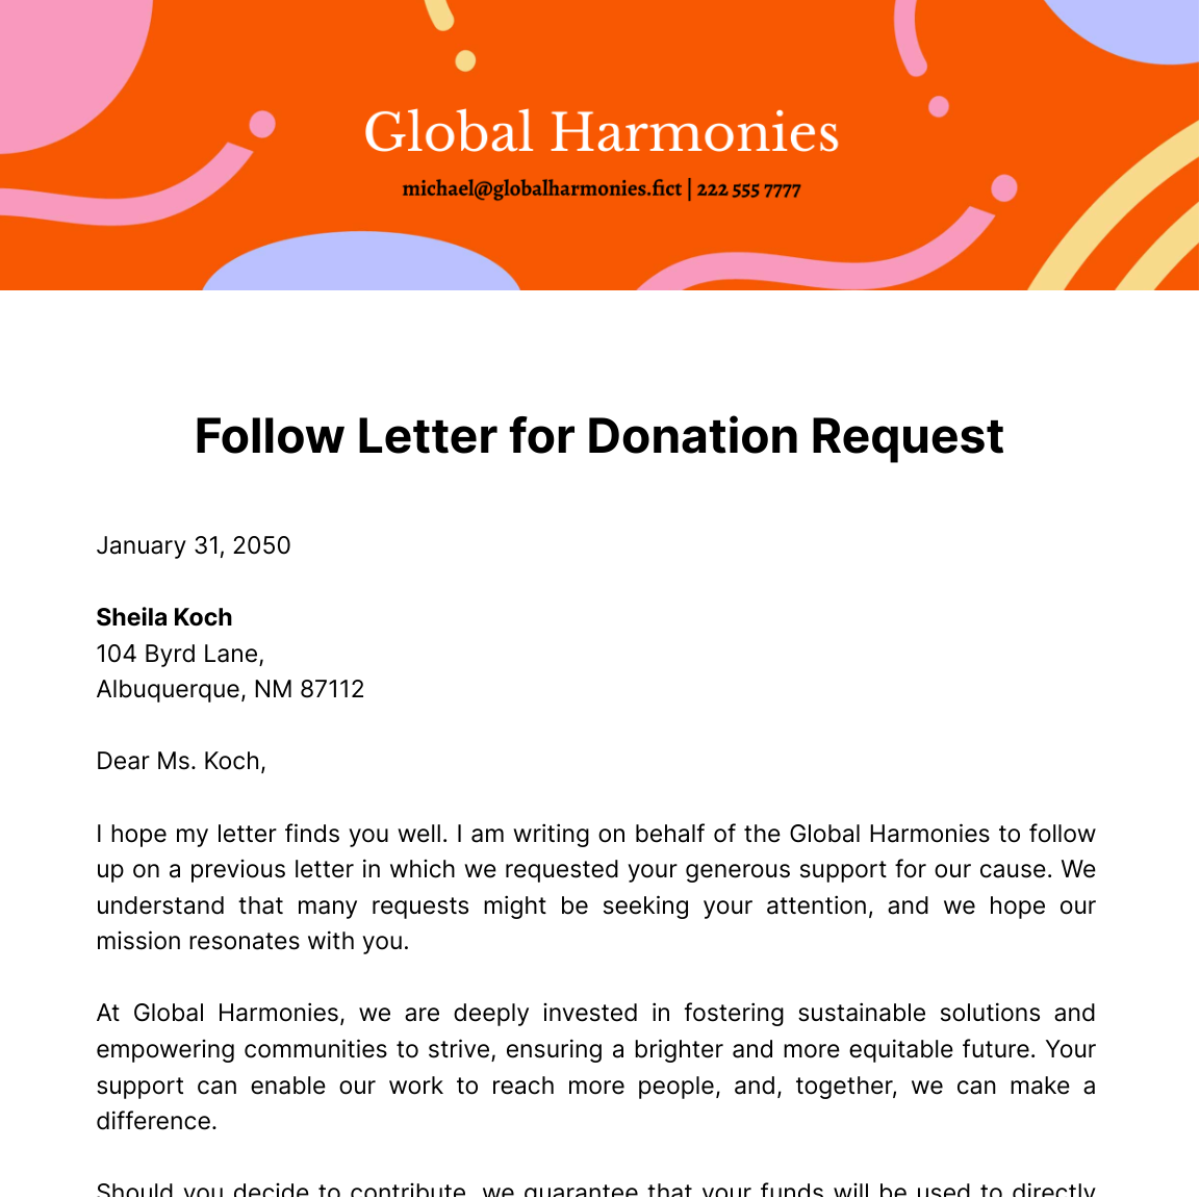 Follow Up Letter for Donation Request Template